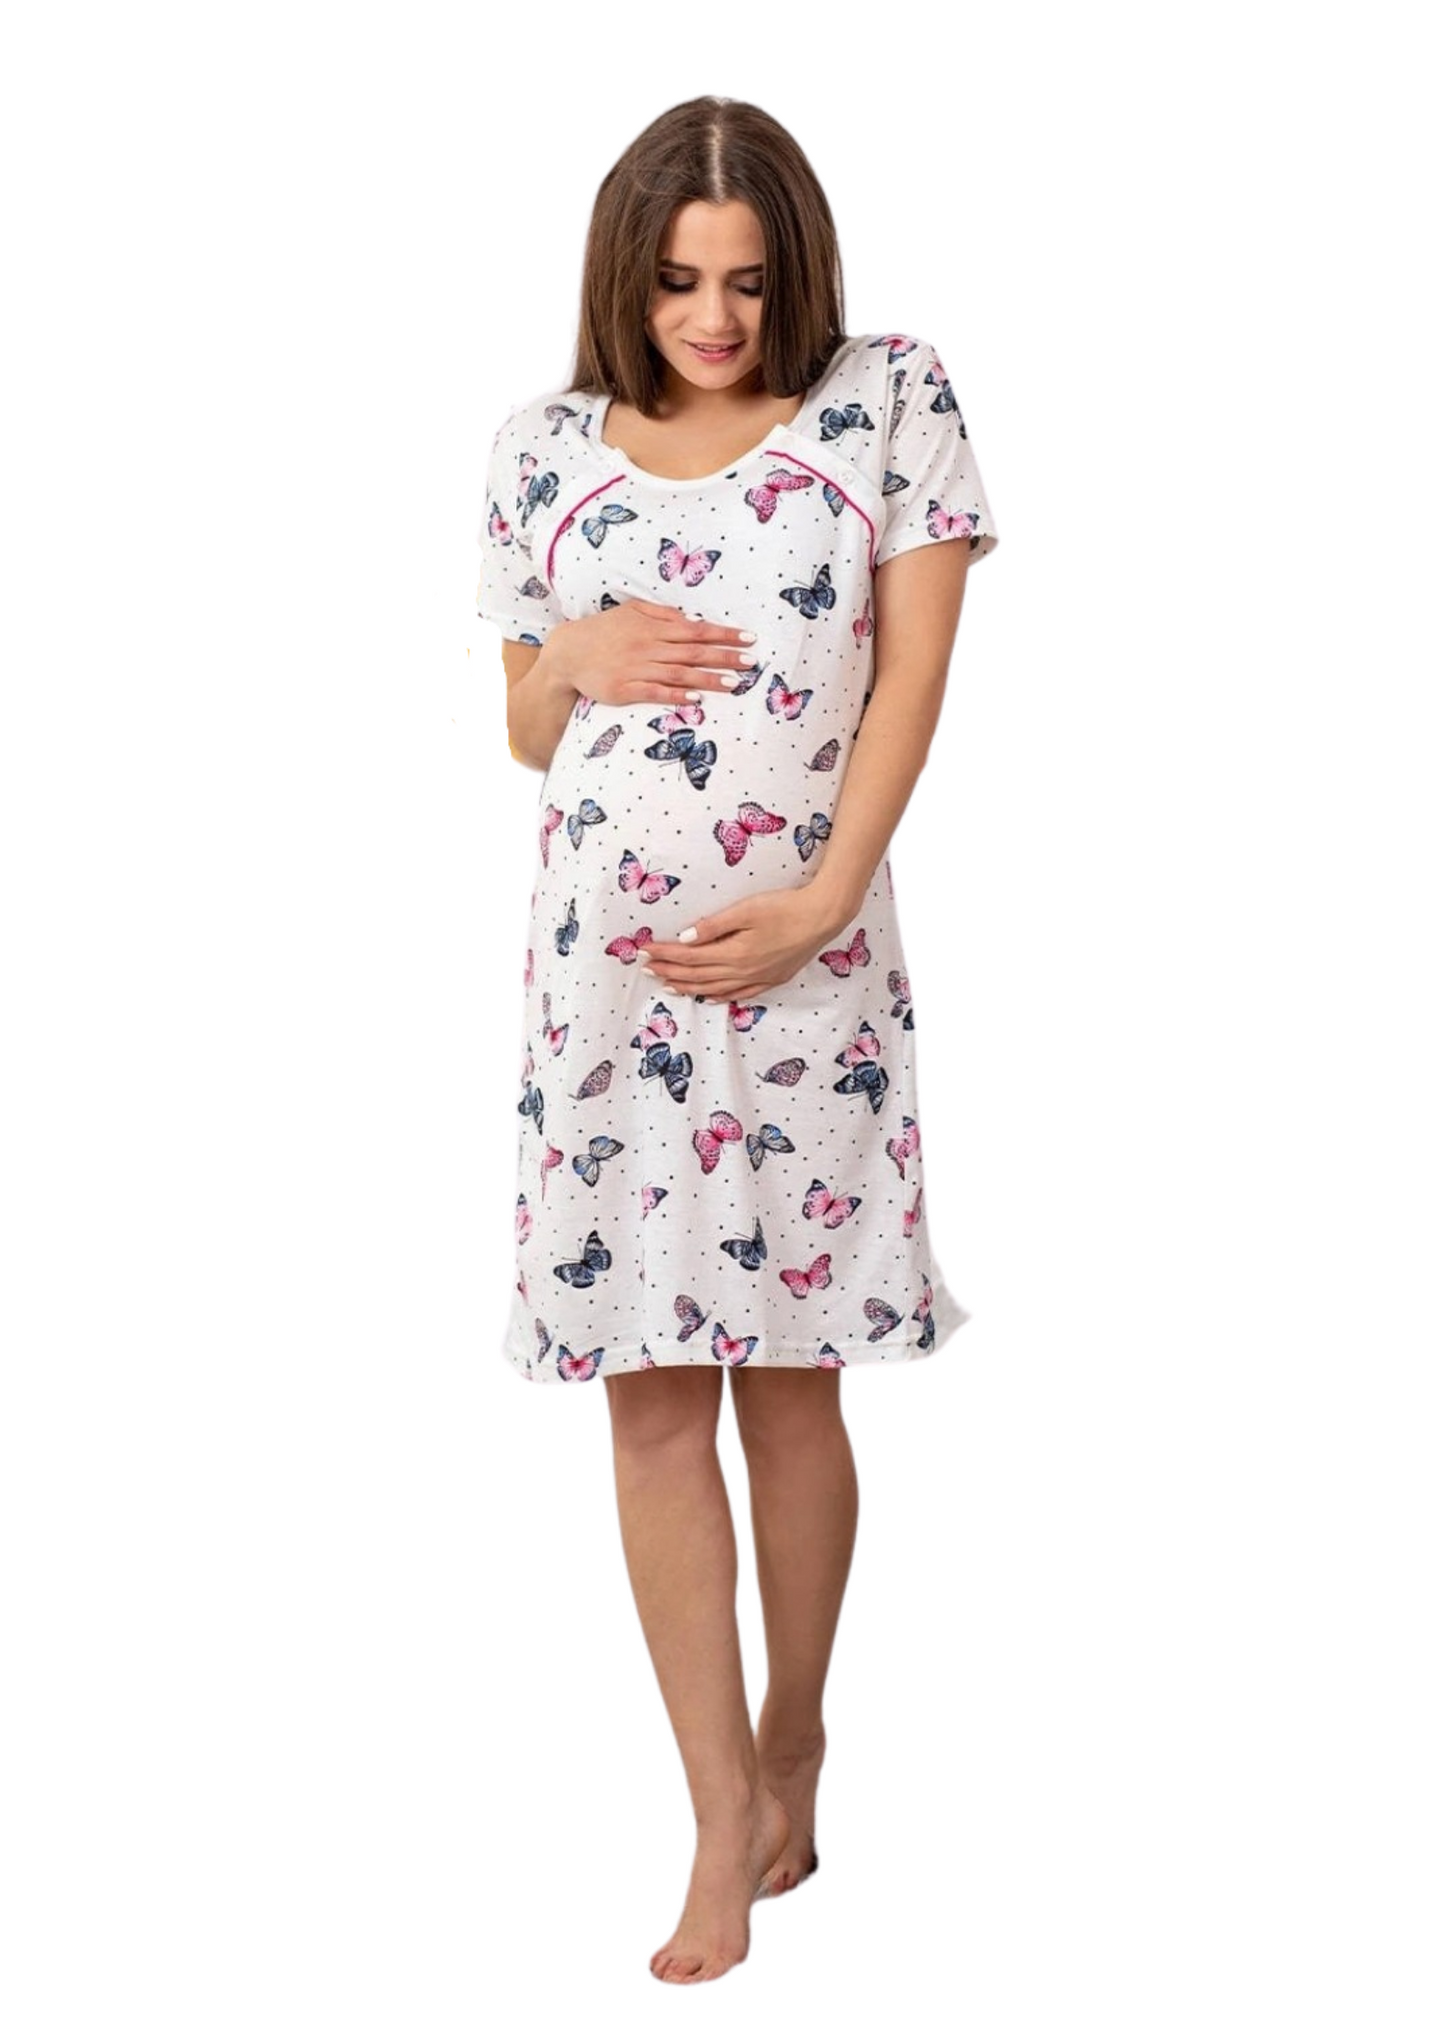 Nightgown with butterflies (maternity/nursing)